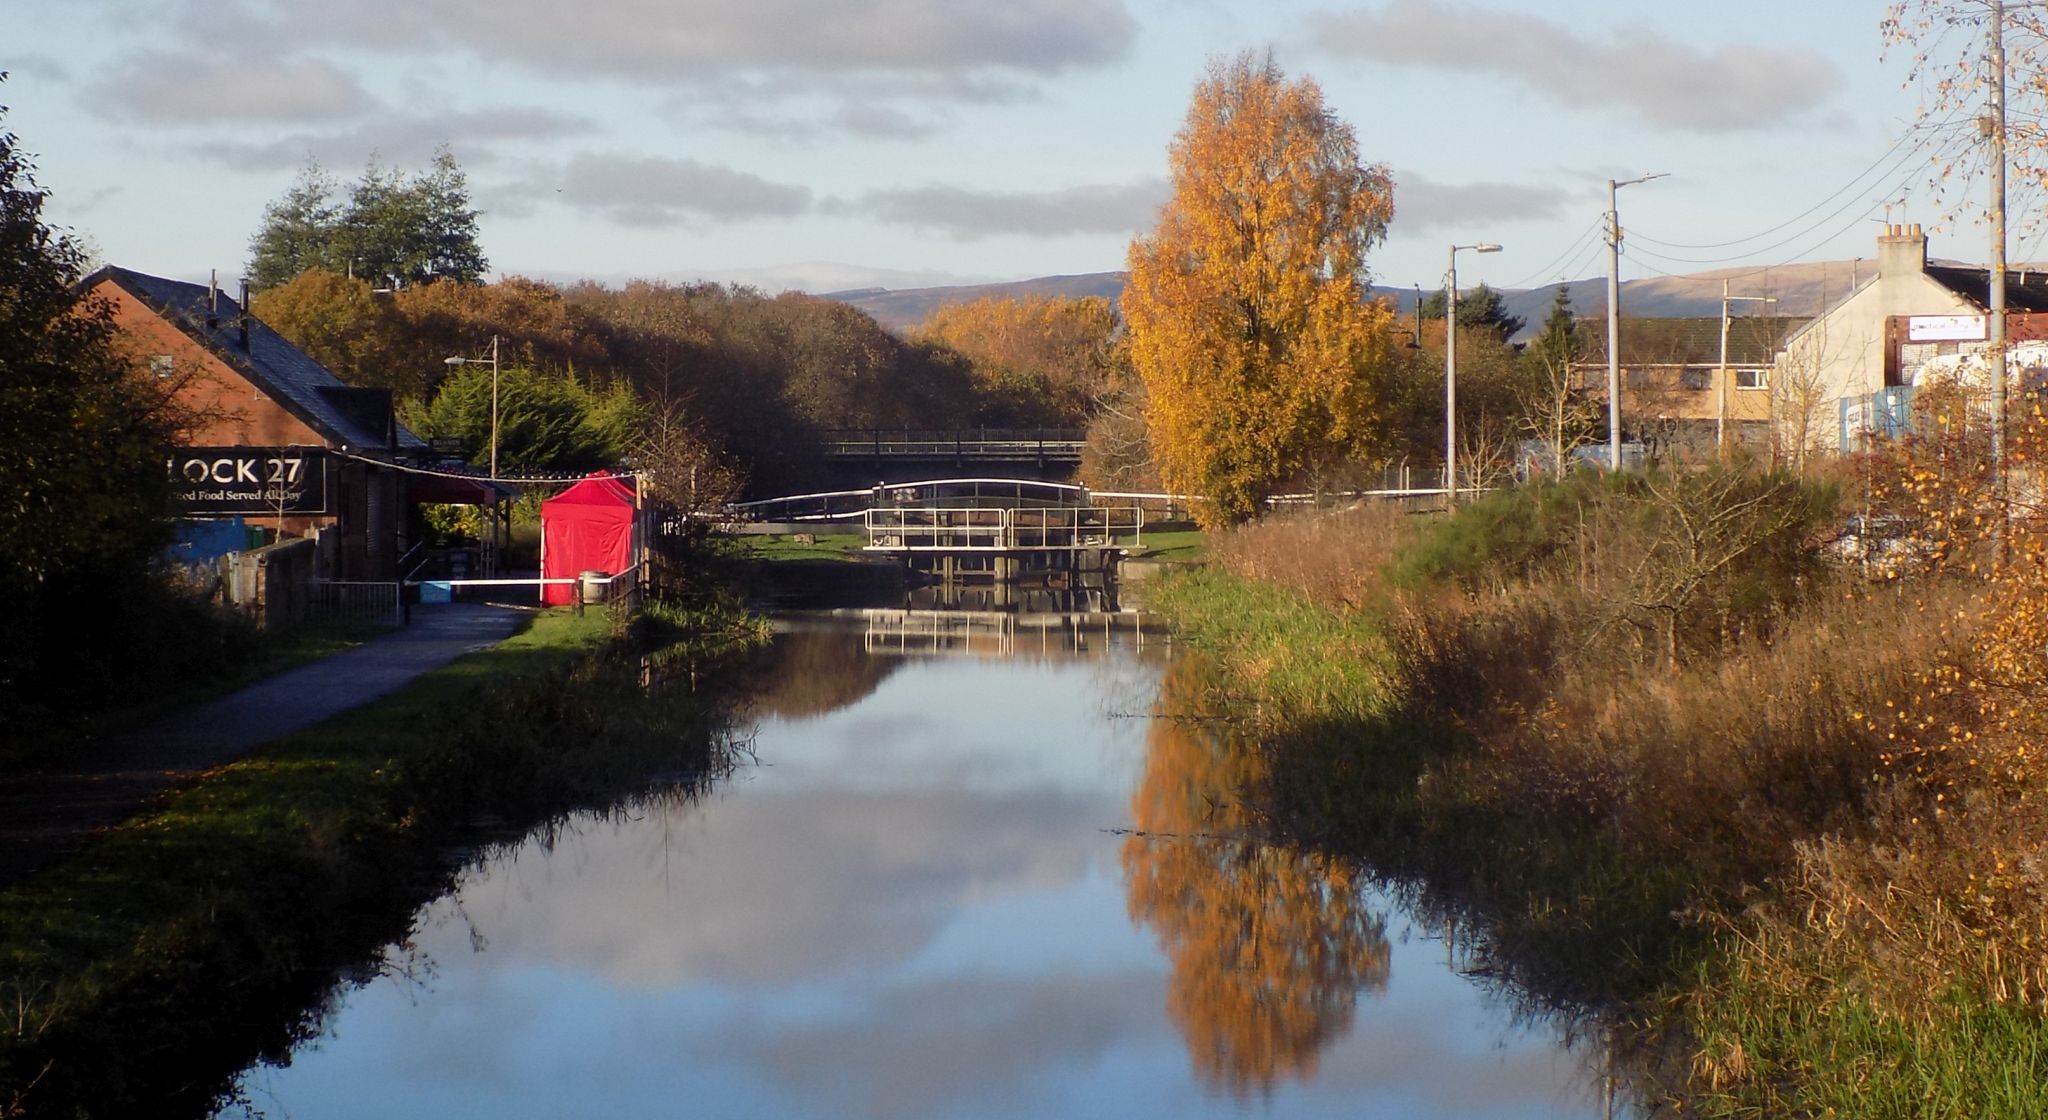 Lock 27 on the Forth & Clyde Canal at Anniesland